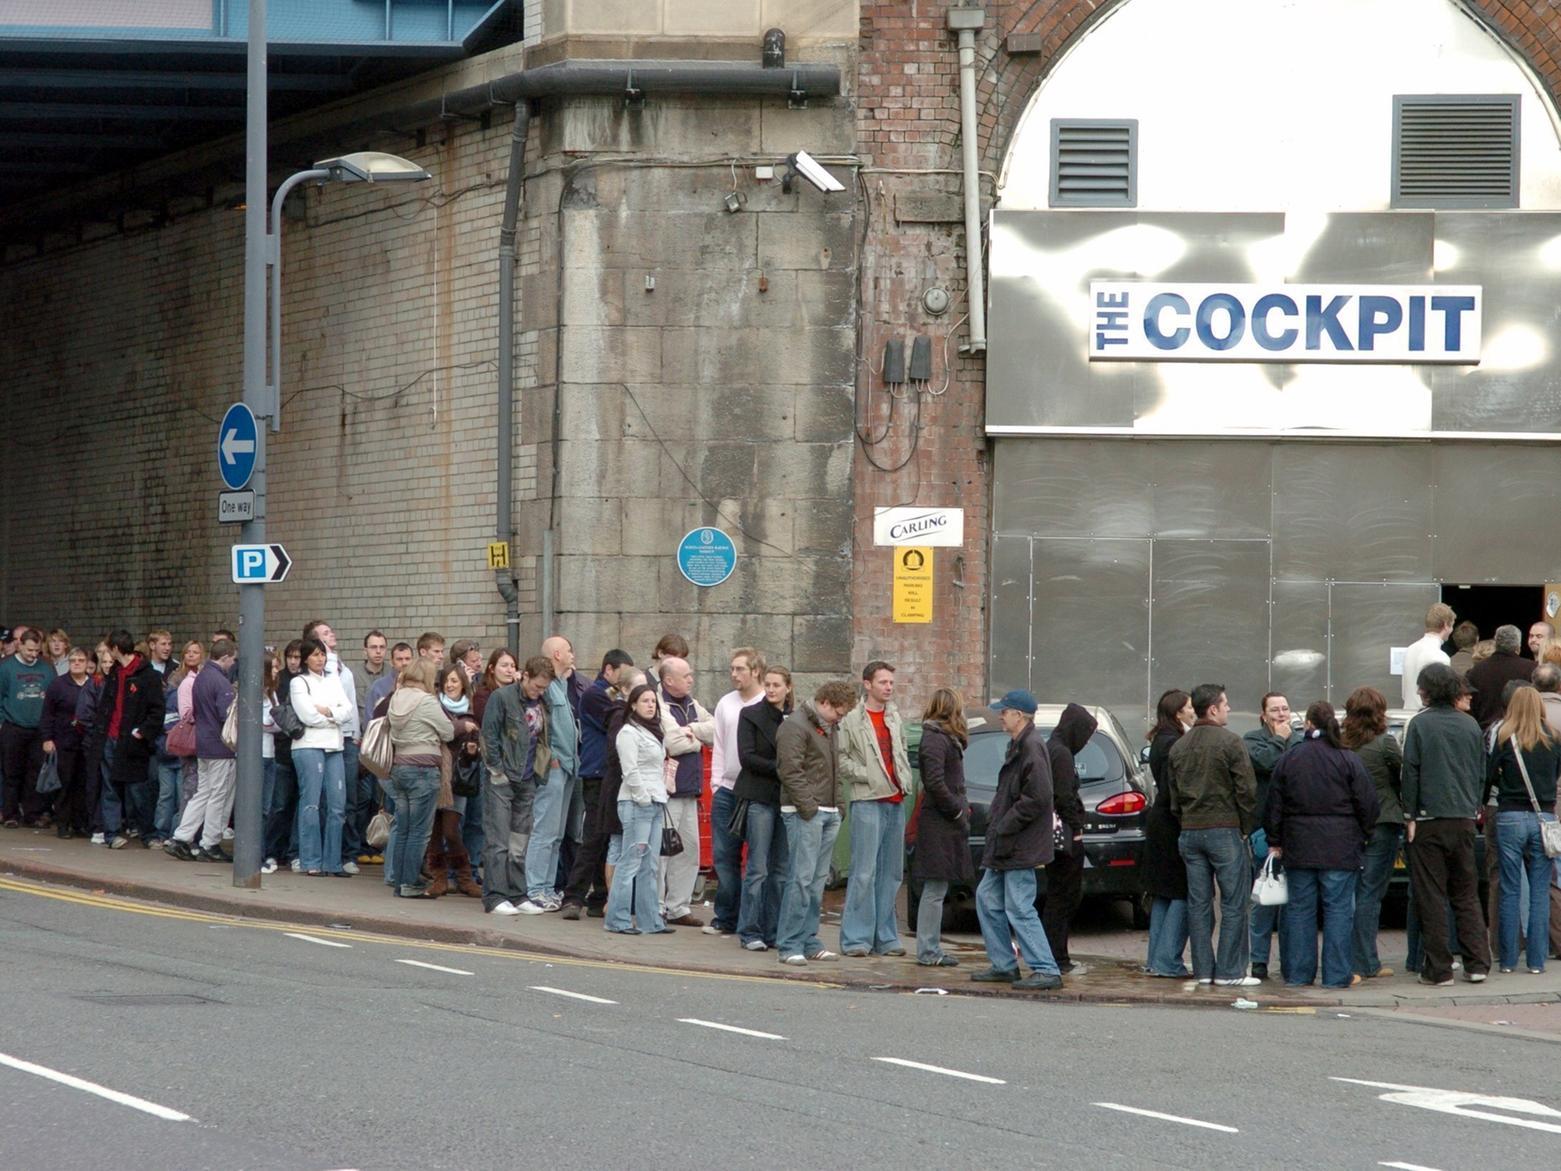 Kaiser Chiefs fans line the streets to get their hands on some tickets as they go on sale at The Cockpit. When: 5 November 2005